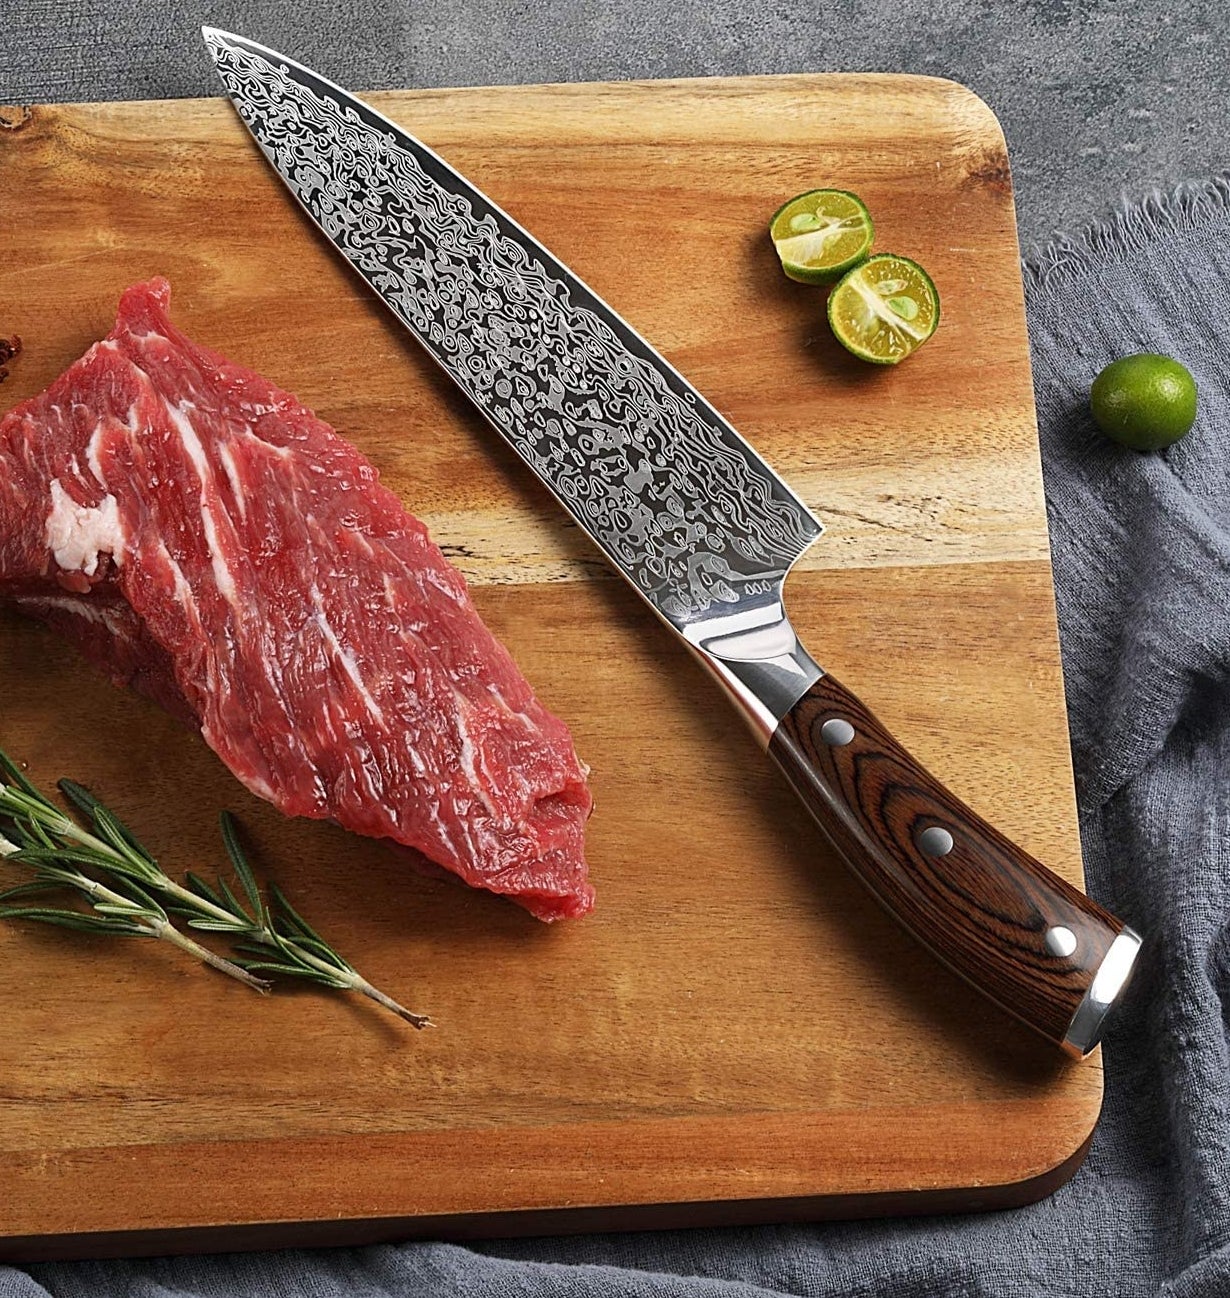 A knife on a cutting board next to a lime, steak, and rosemary 